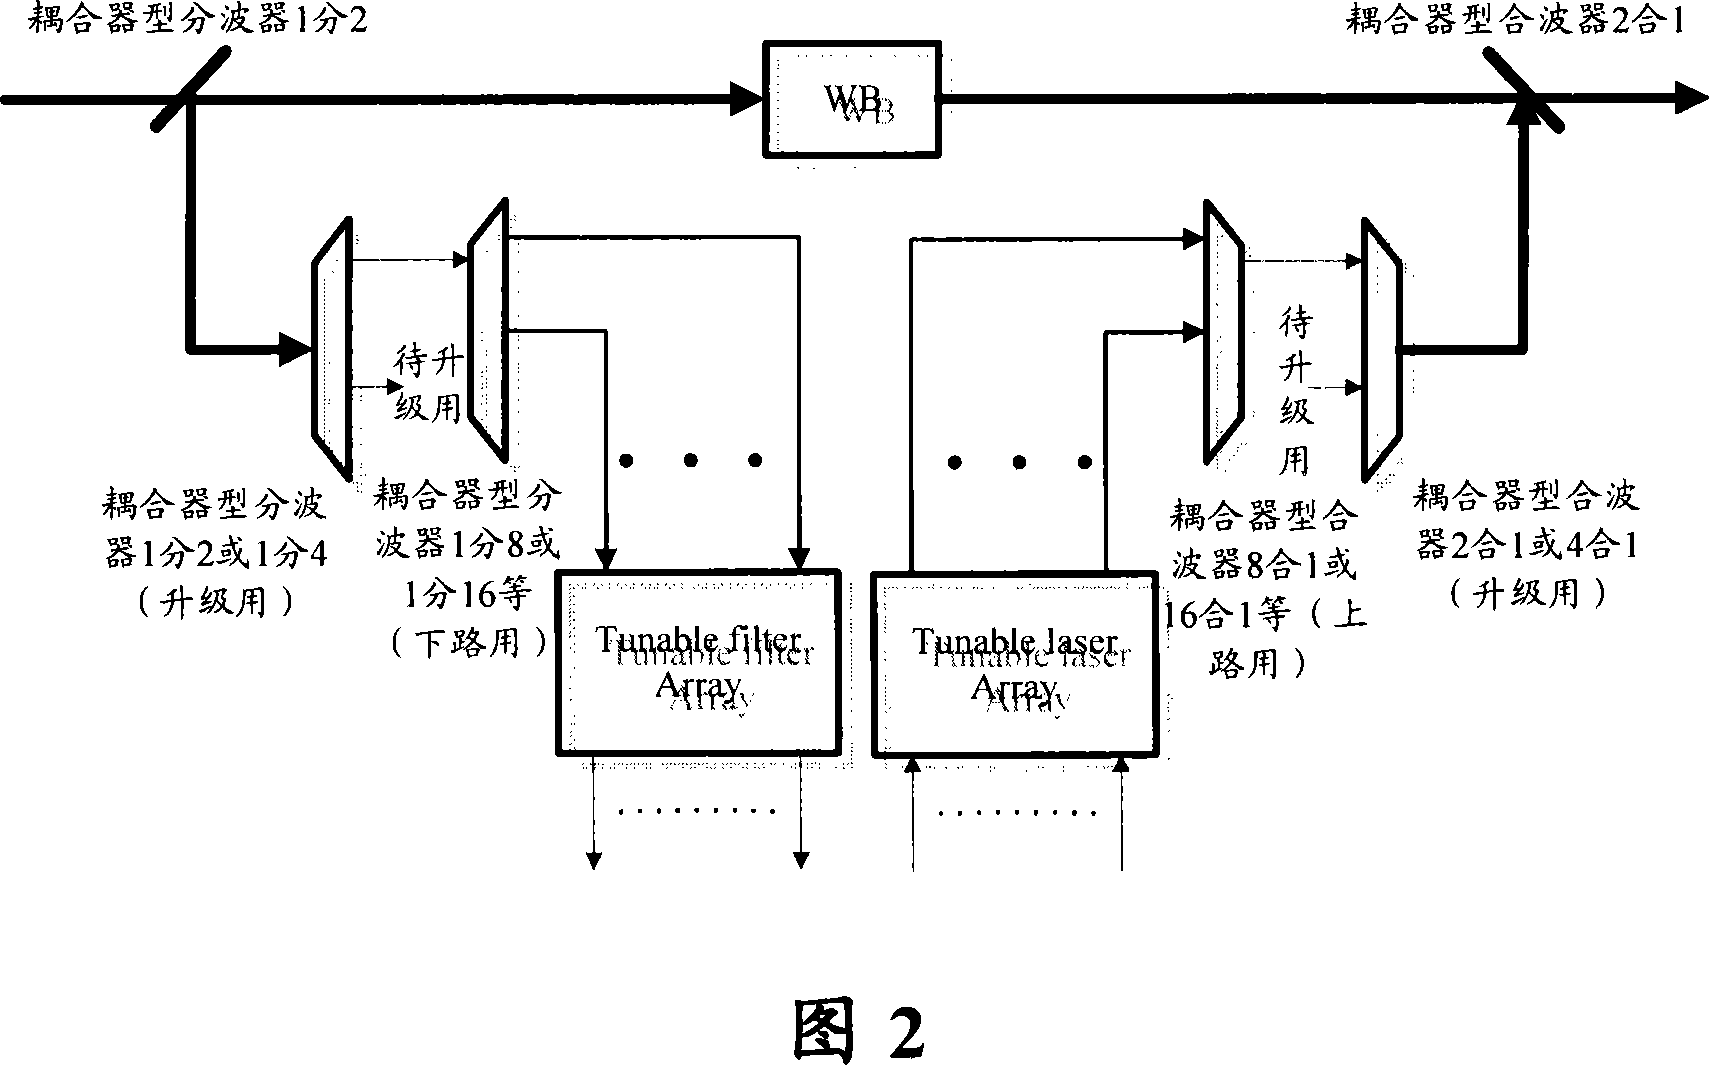 Collocating OADM apparatus for implementing flexile wavelength scheduling